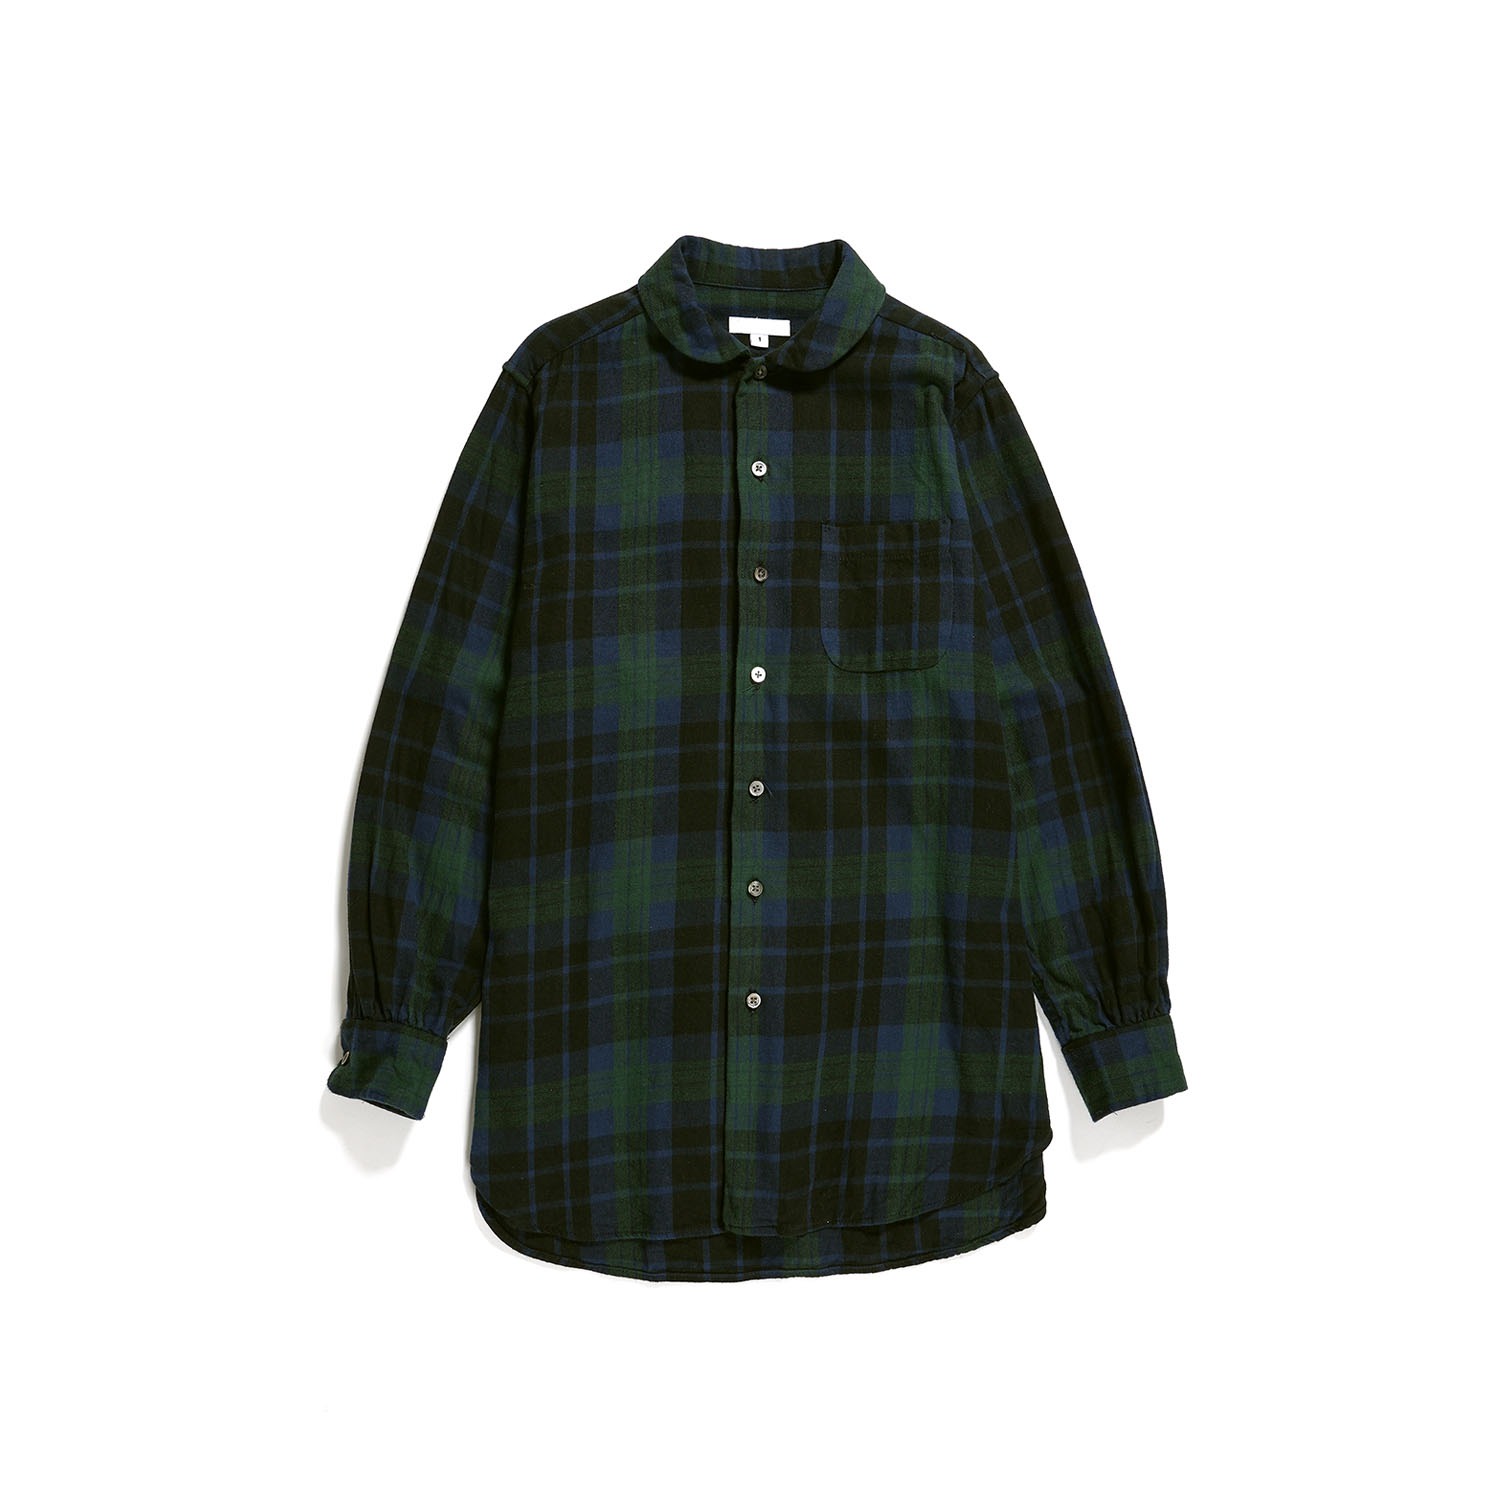 ﻿Rounded Collar Shirt - Black Watch